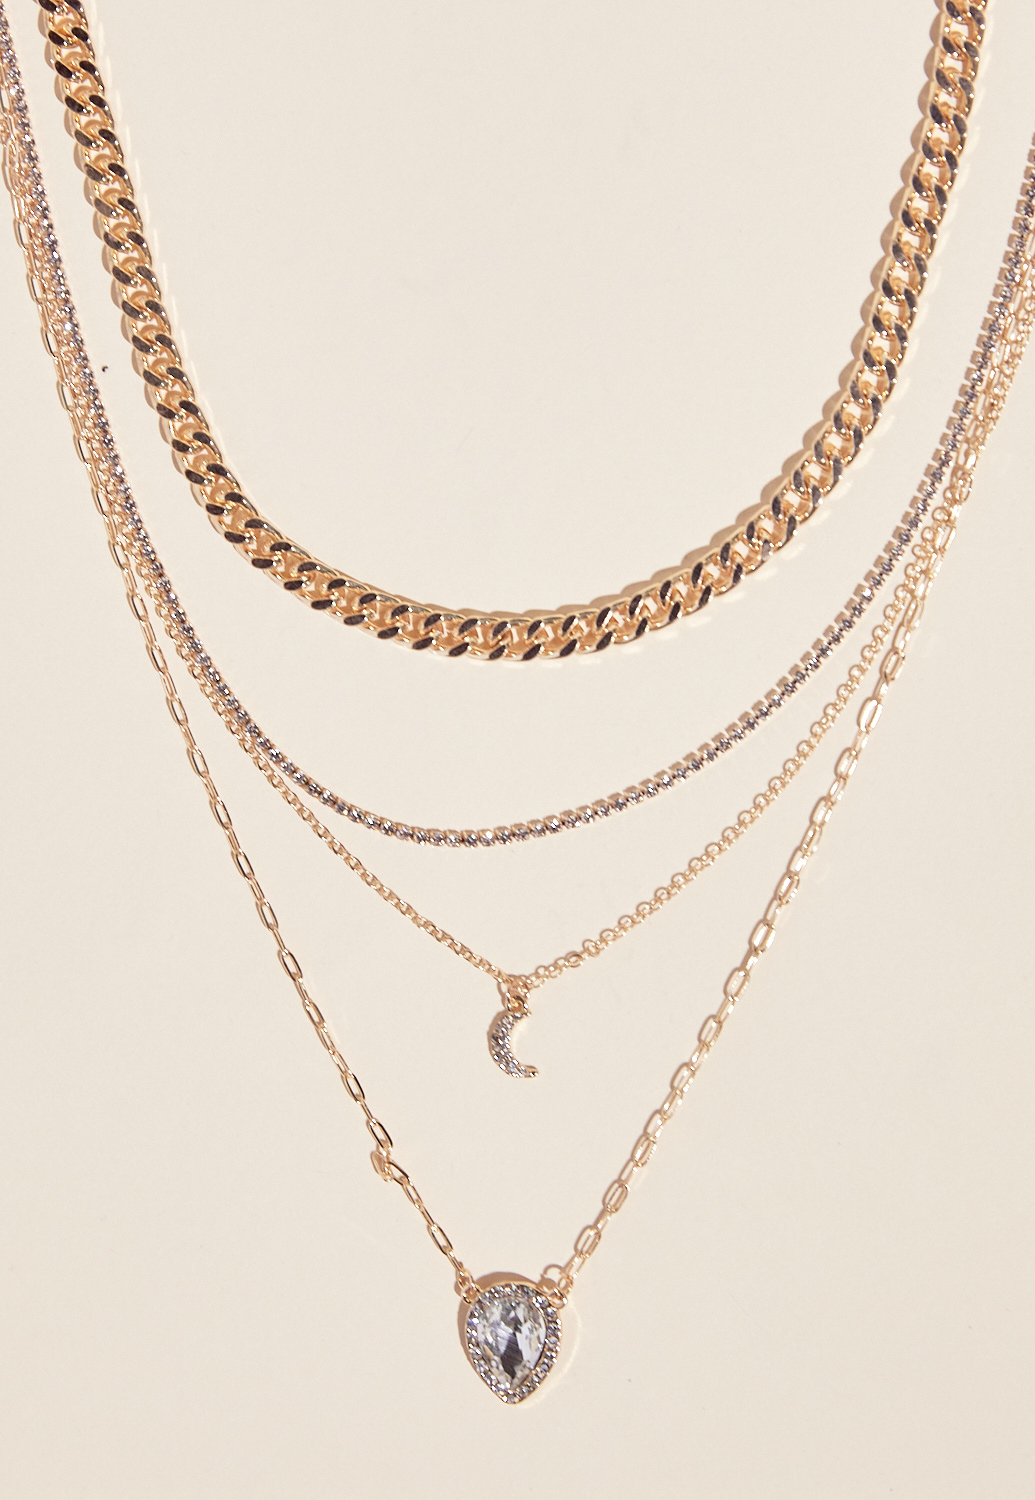 4 Layered Chain Necklace 